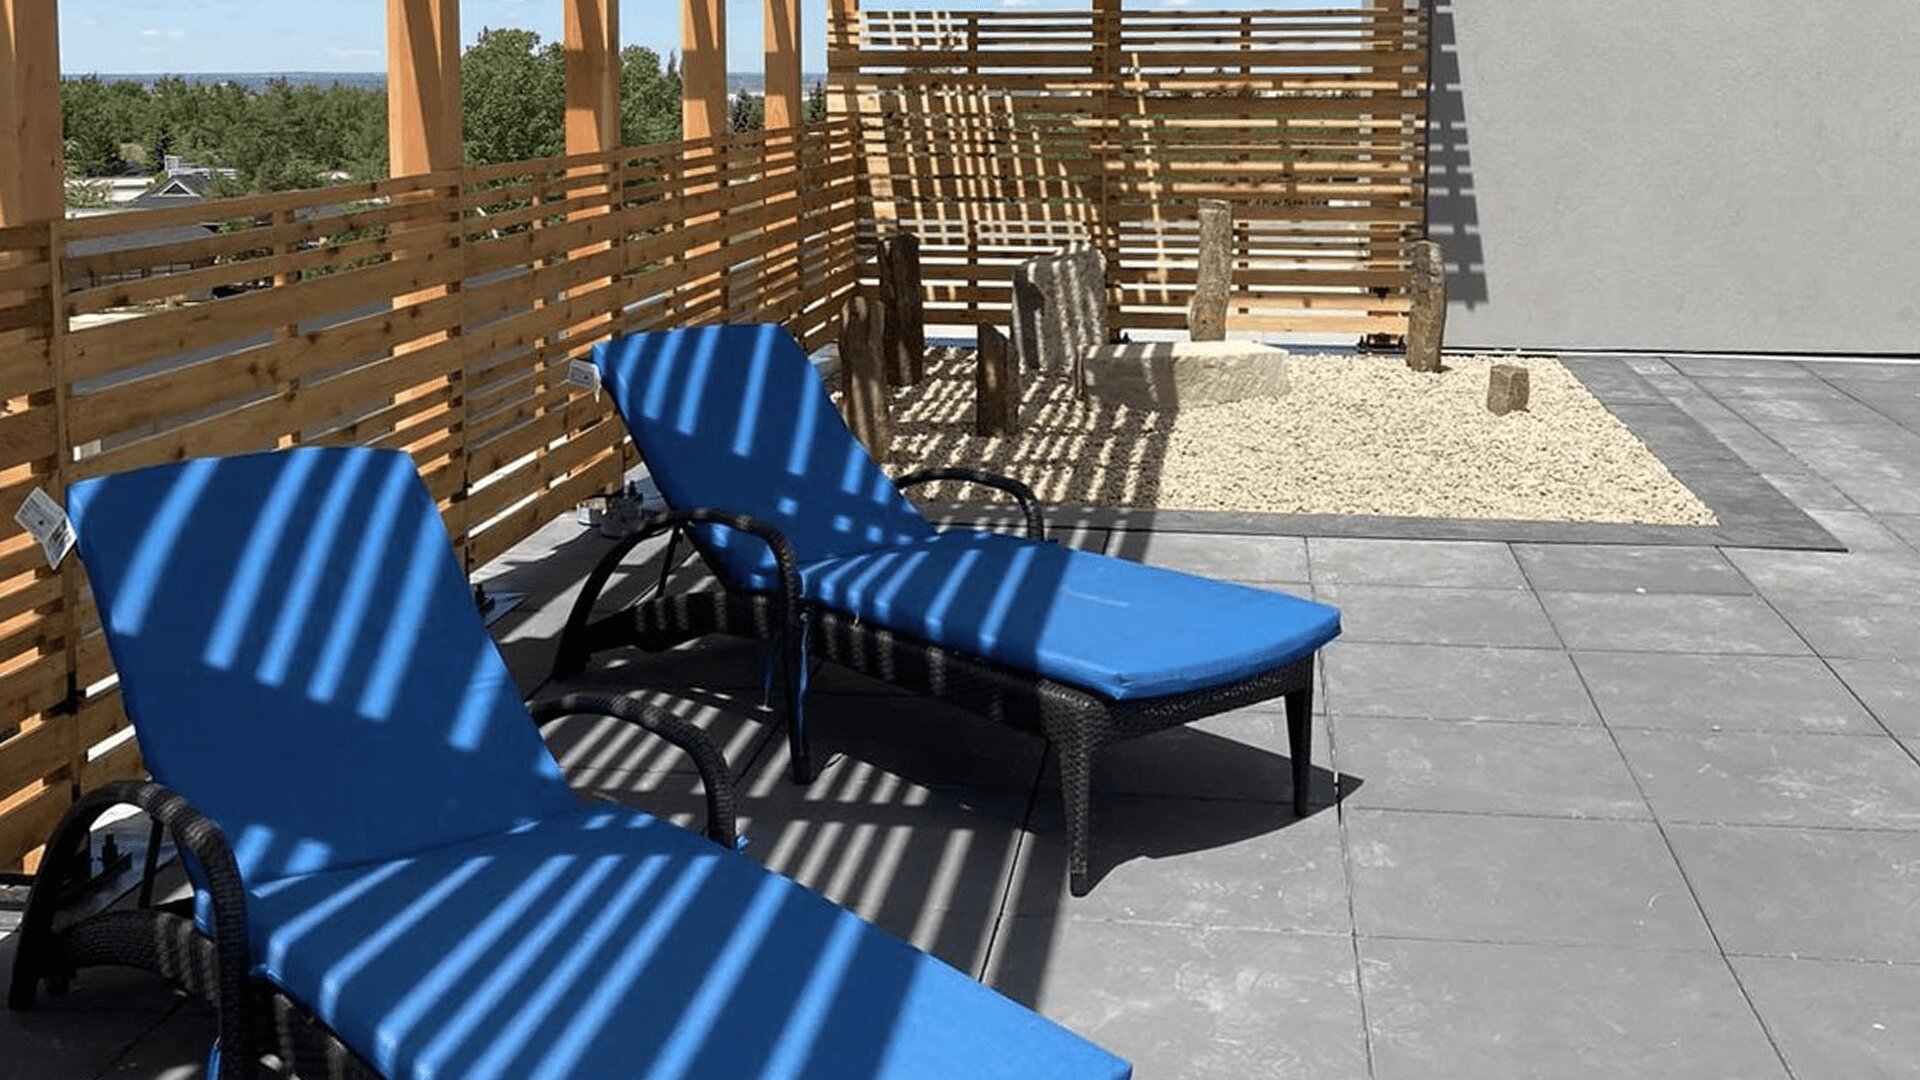 Comfortable patio for the senior citizens at Aster Gardens